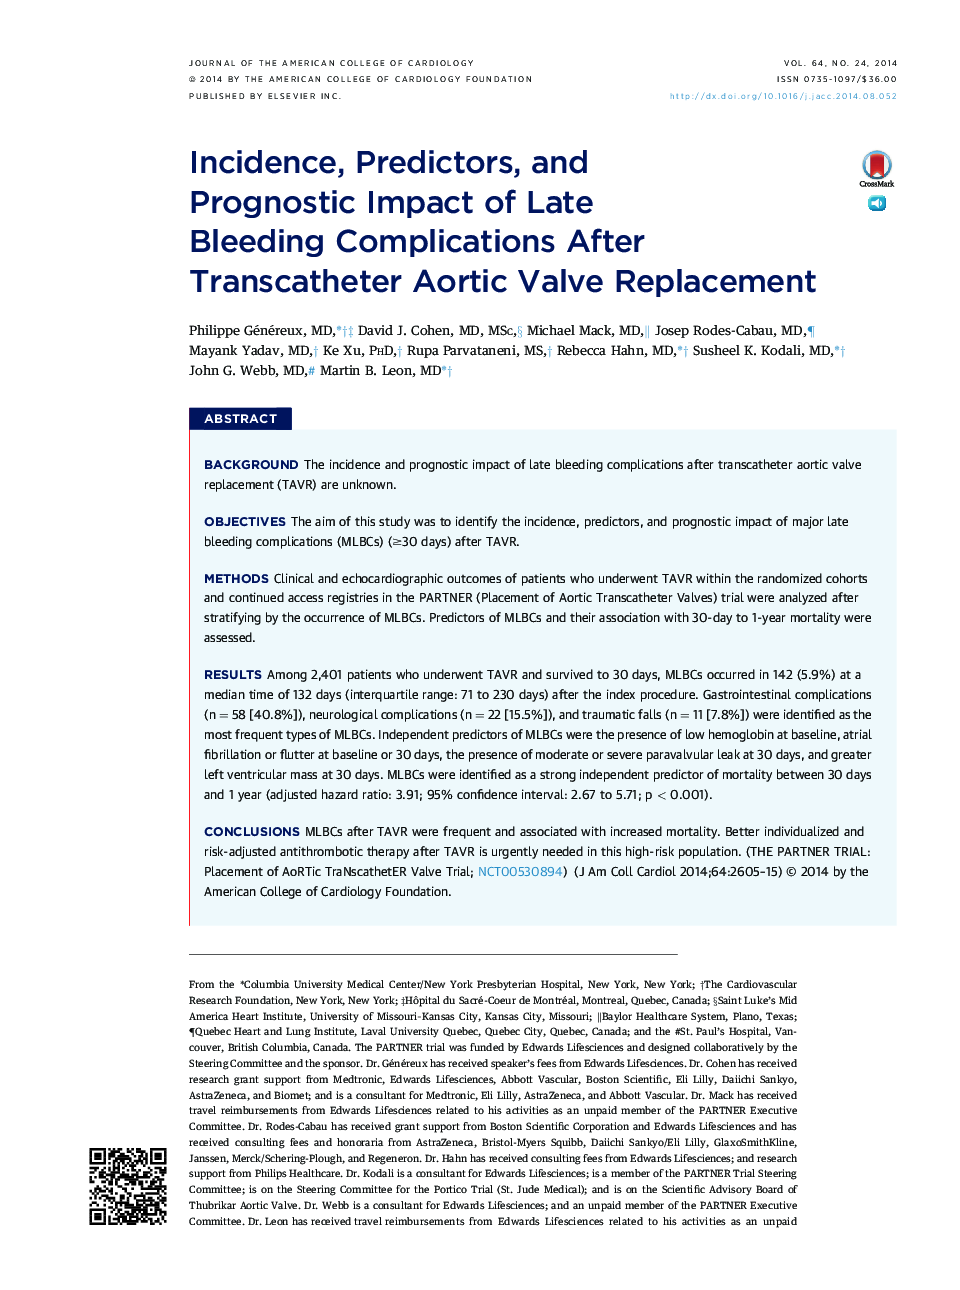 Incidence, Predictors, and PrognosticÂ Impact of Late Bleeding Complications After Transcatheter Aortic Valve Replacement